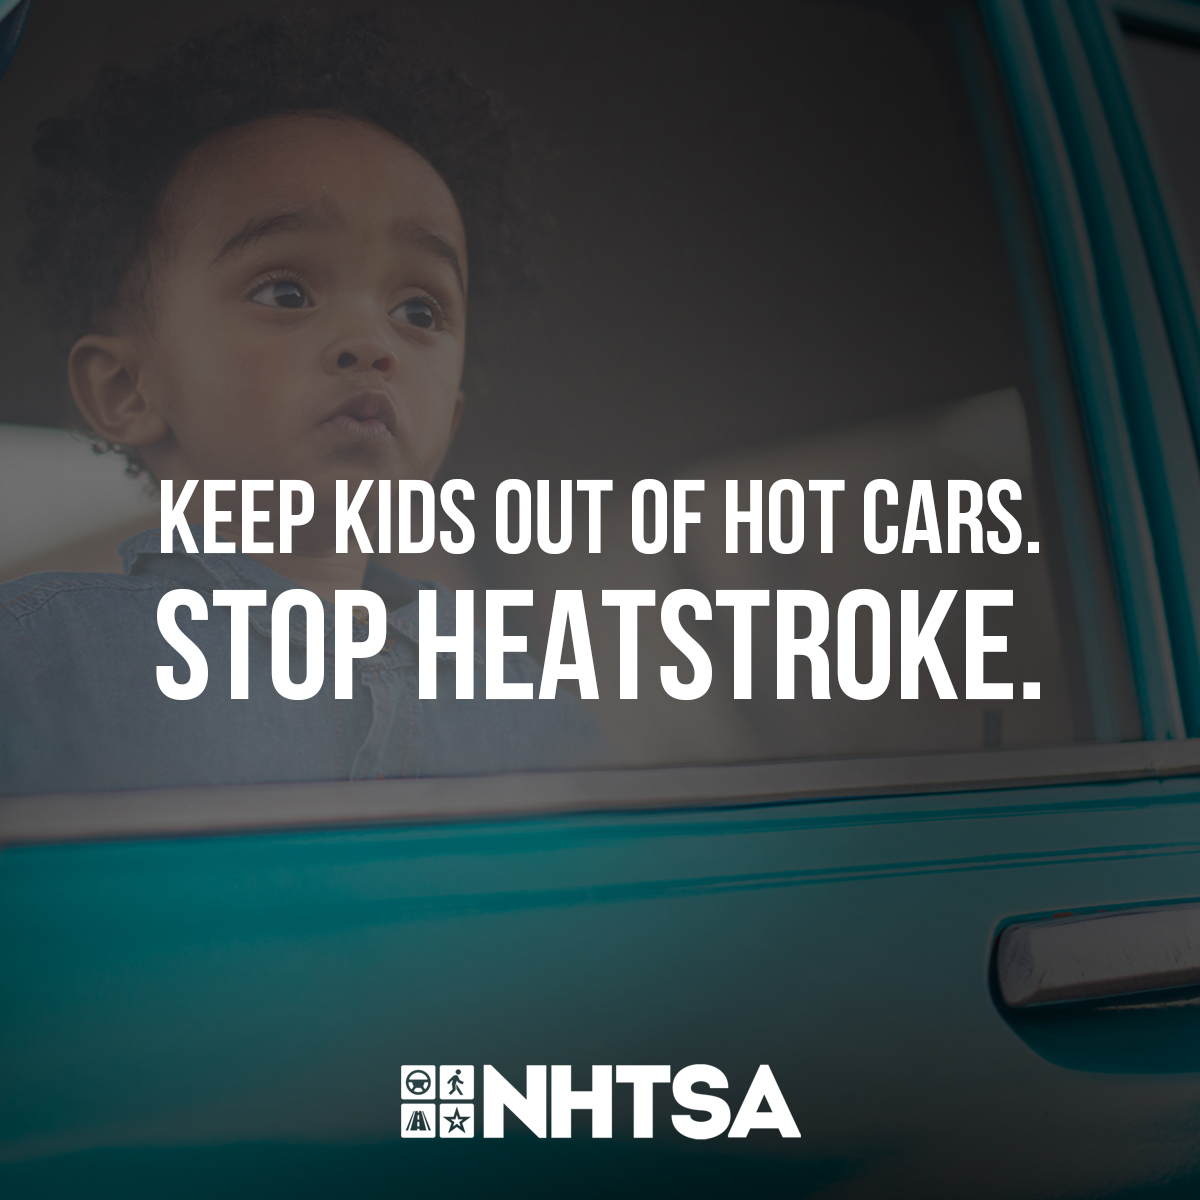 We know it's downright chilly today but it's always a good reminder to look before you lock. Children should never, ever be left in a car alone. #heatstrokeprevention #heatstroke